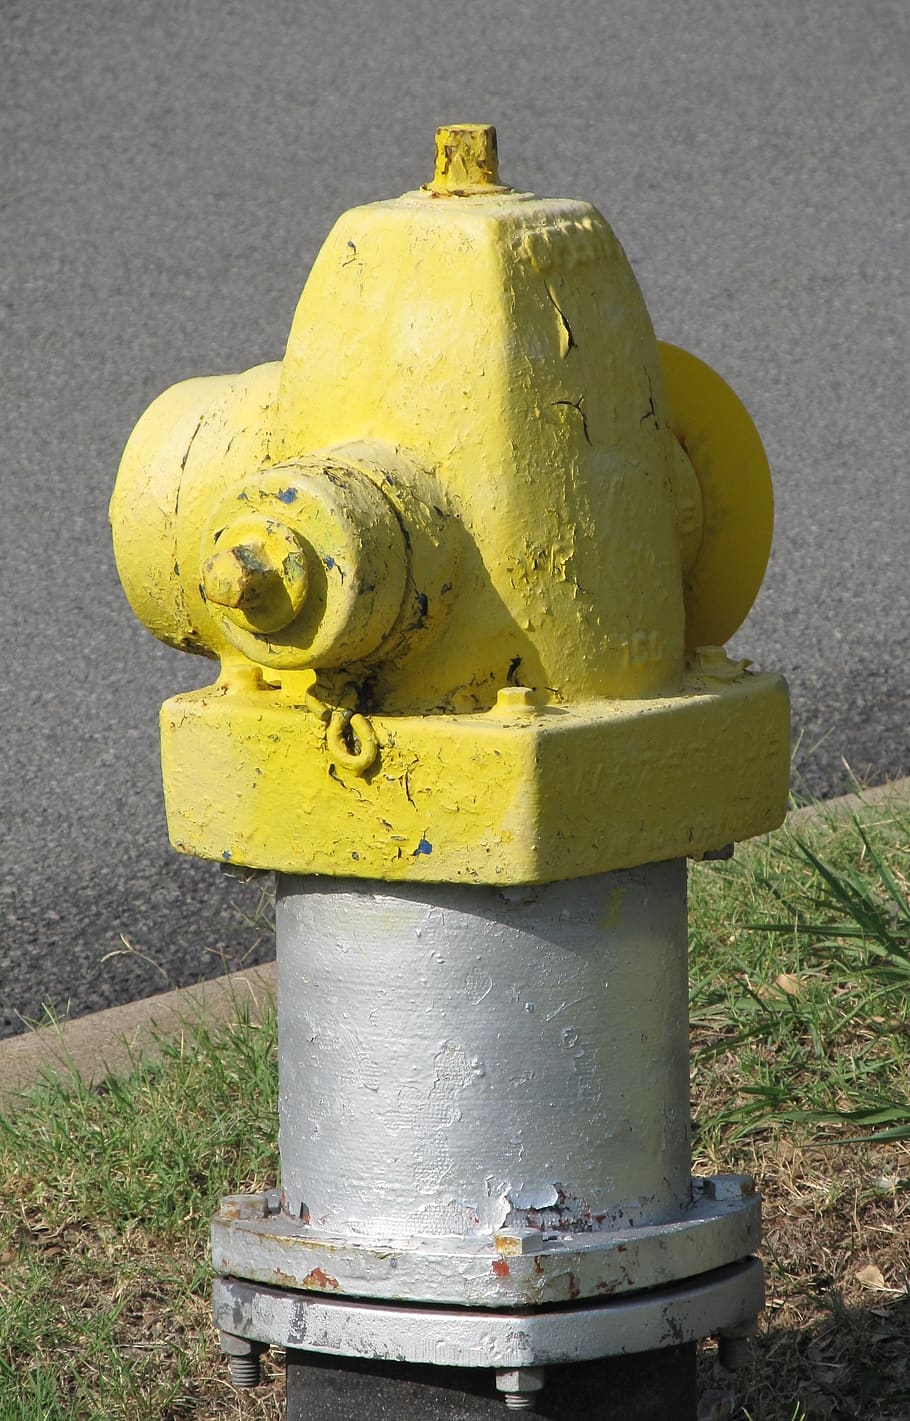 fire hydrant, fire plug, hydrant, fire, water, safety, emergency, protection, metal, yellow